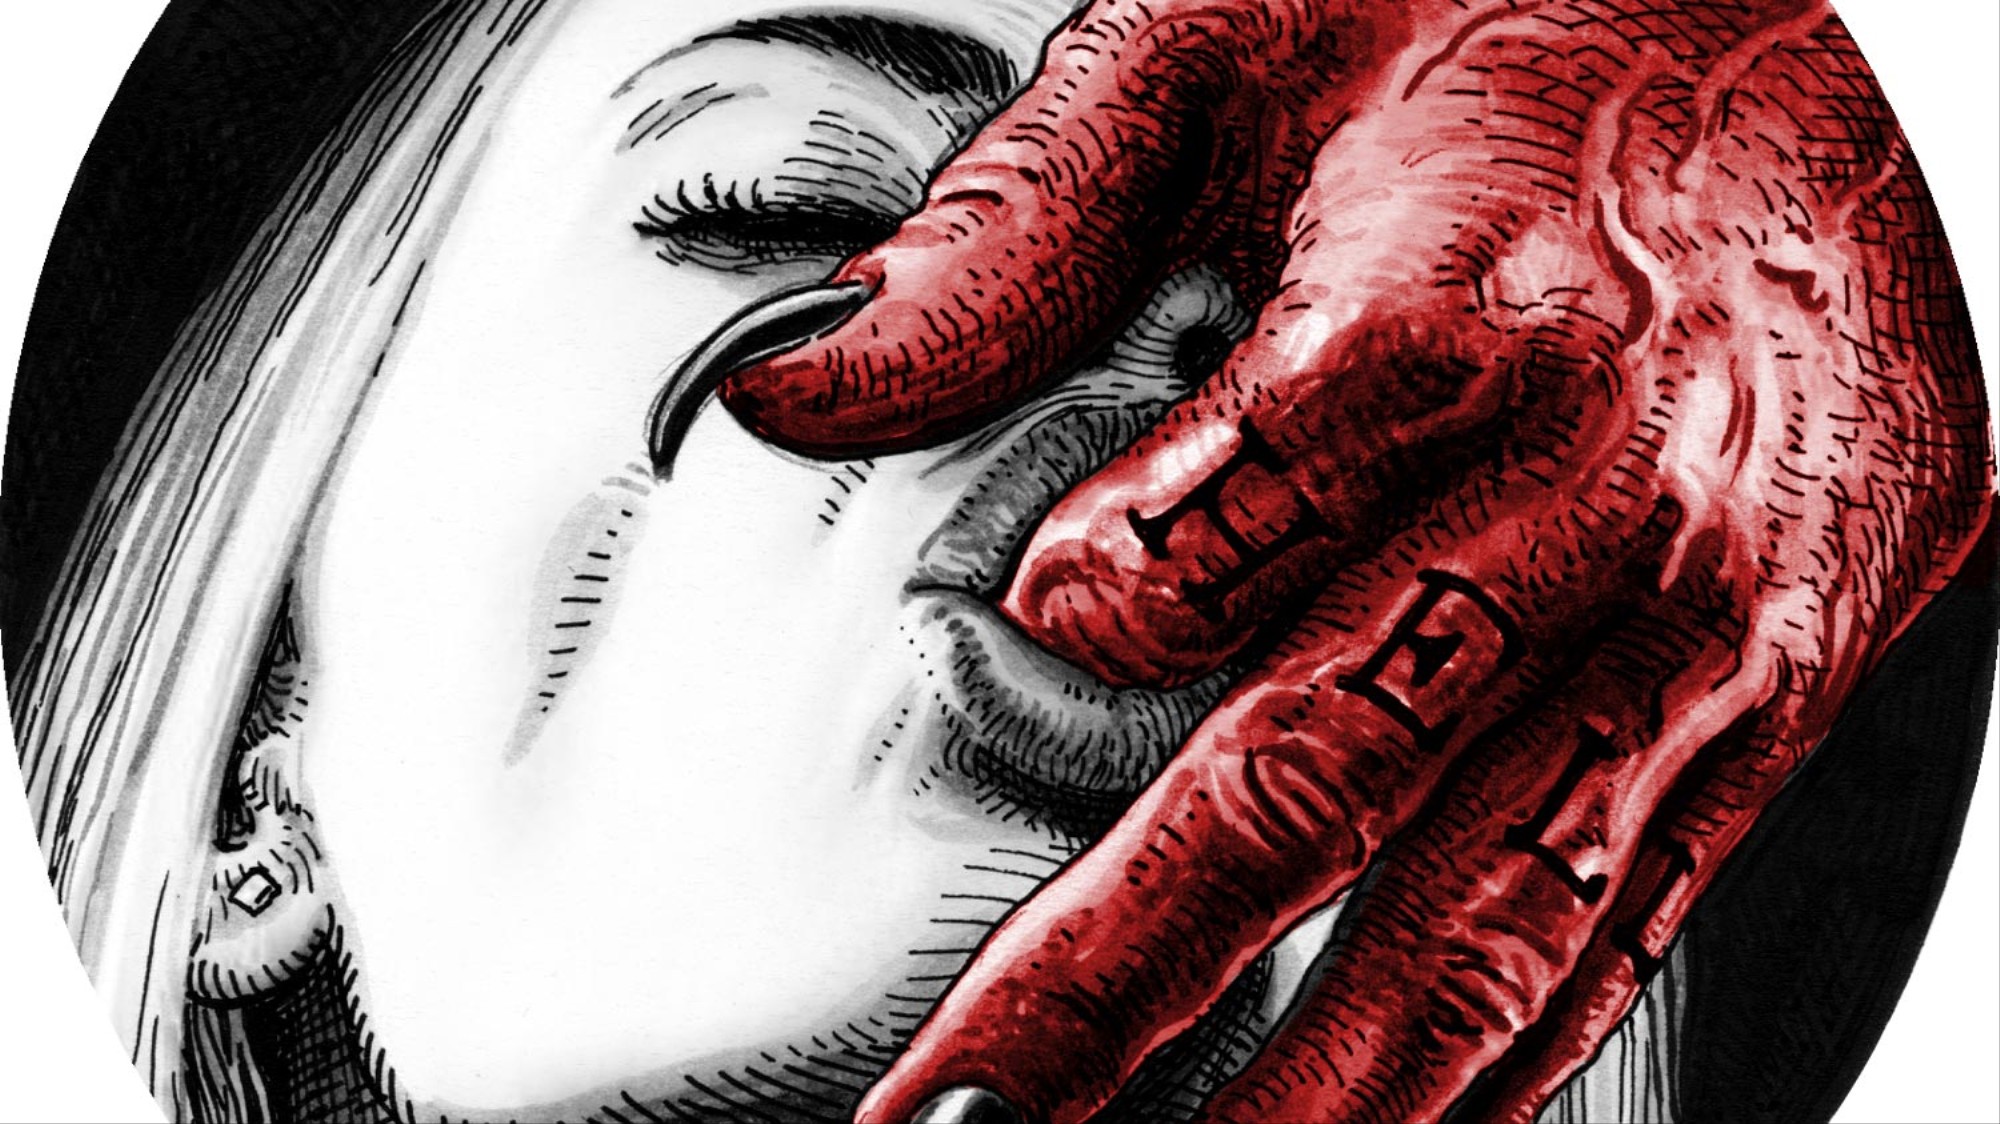 Satanic Sex Bdsm - NSFW] These Devilish Illustrations Are Sinfully Sexy - VICE